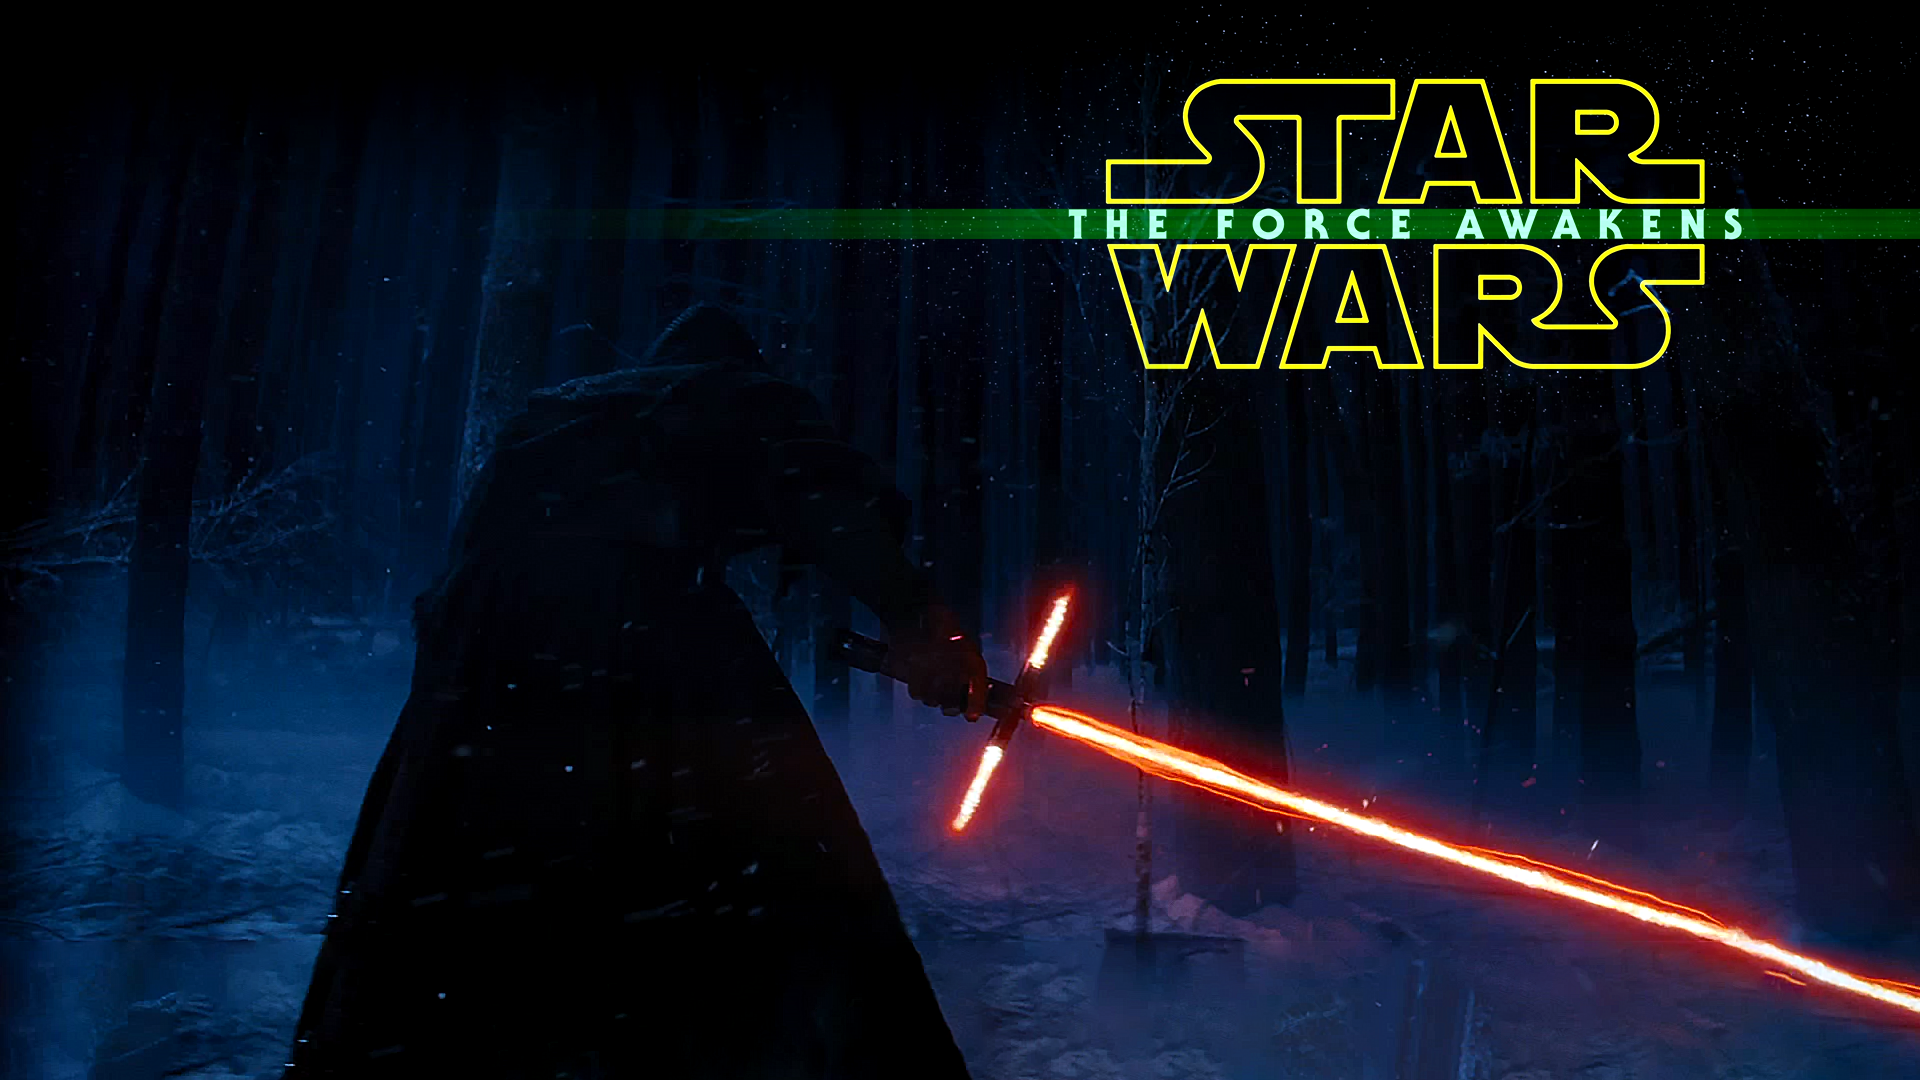 New Sith Star Wars episodes 7 The Force Awakens